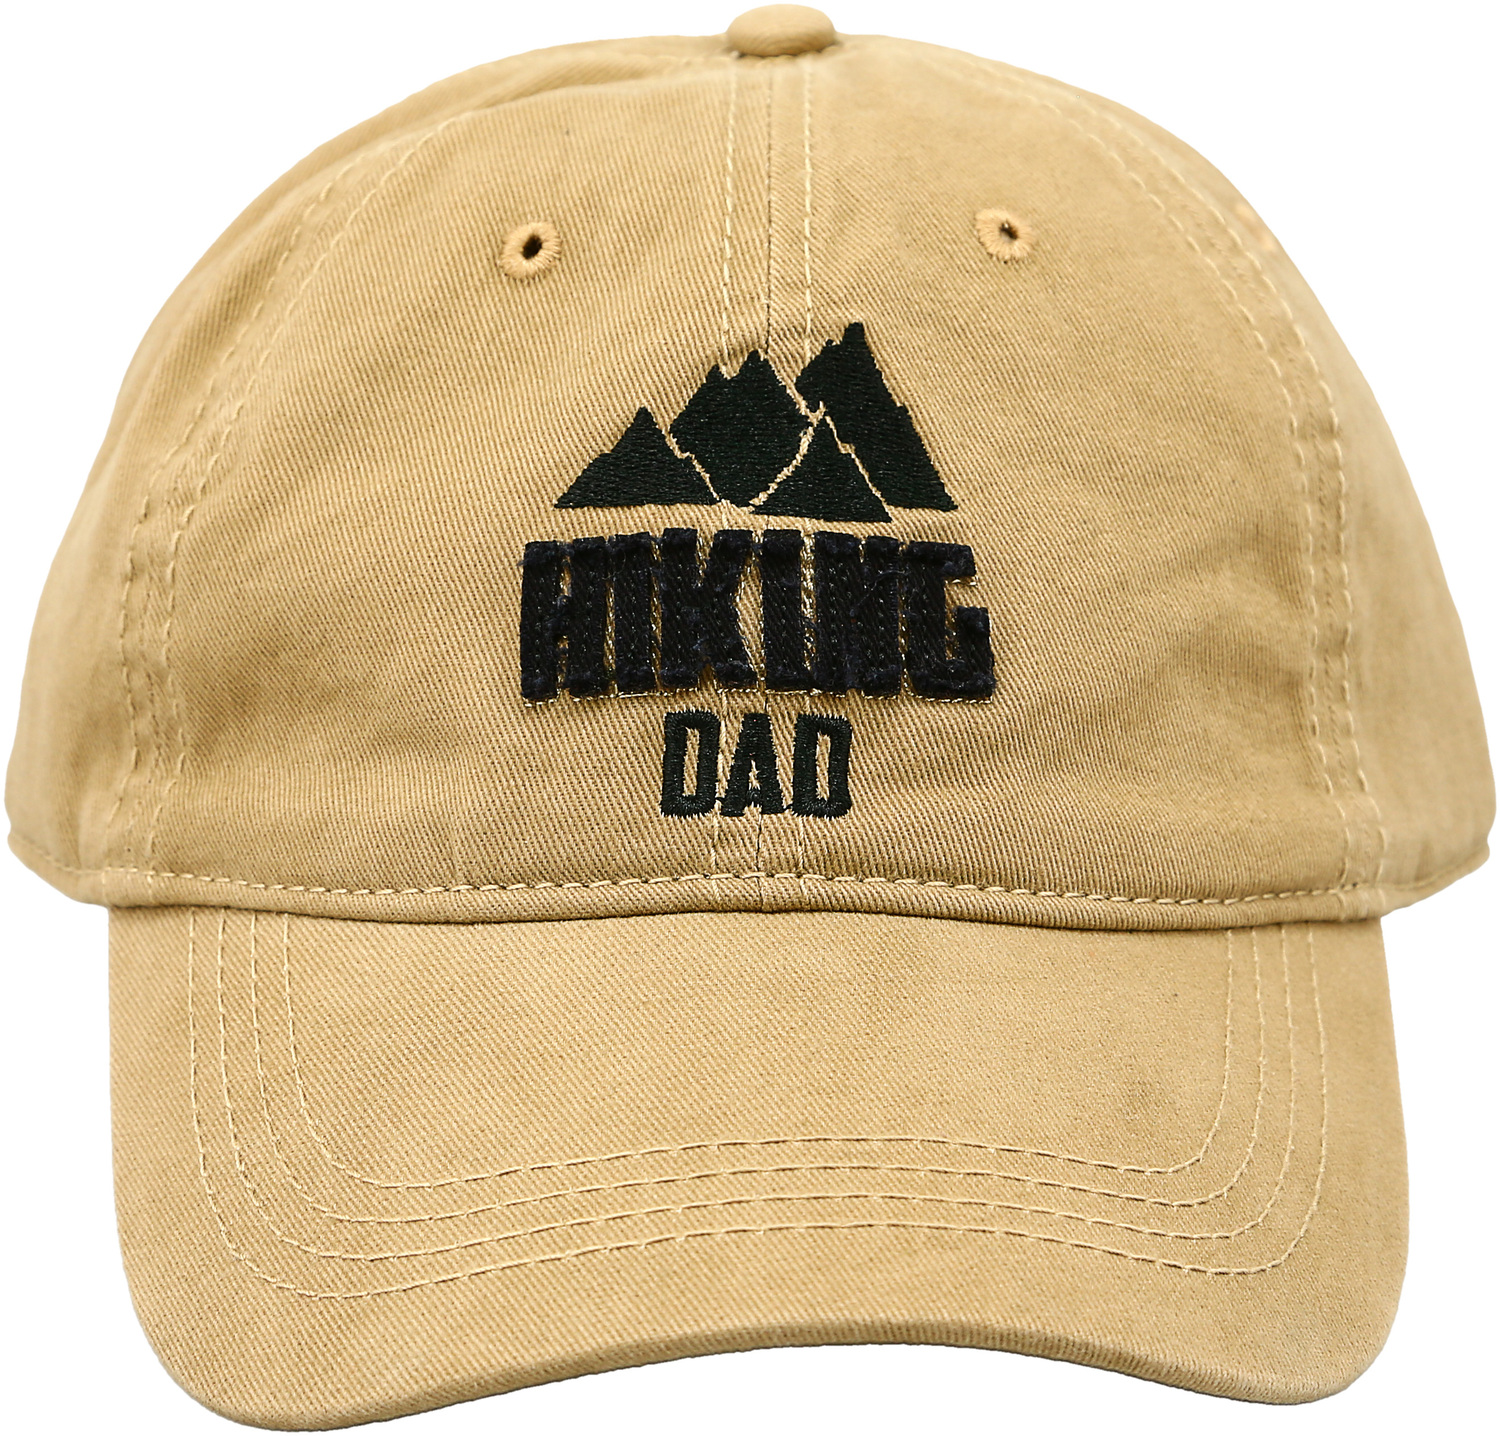 Hiking Dad by Man Out - Hiking Dad - Tan Adjustable Hat